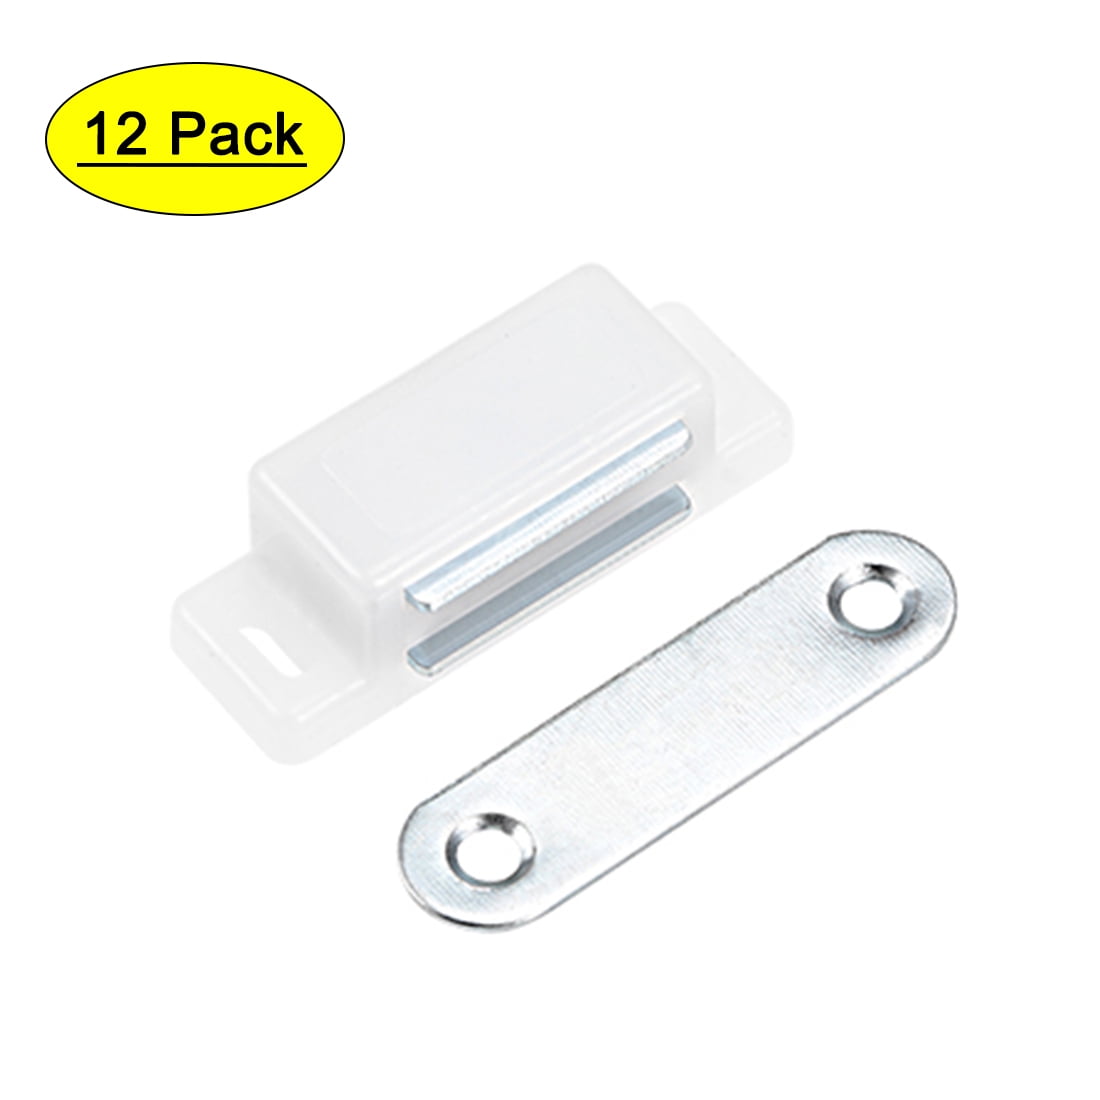 10-Pack Magnetic Cabinet Catch with Strike